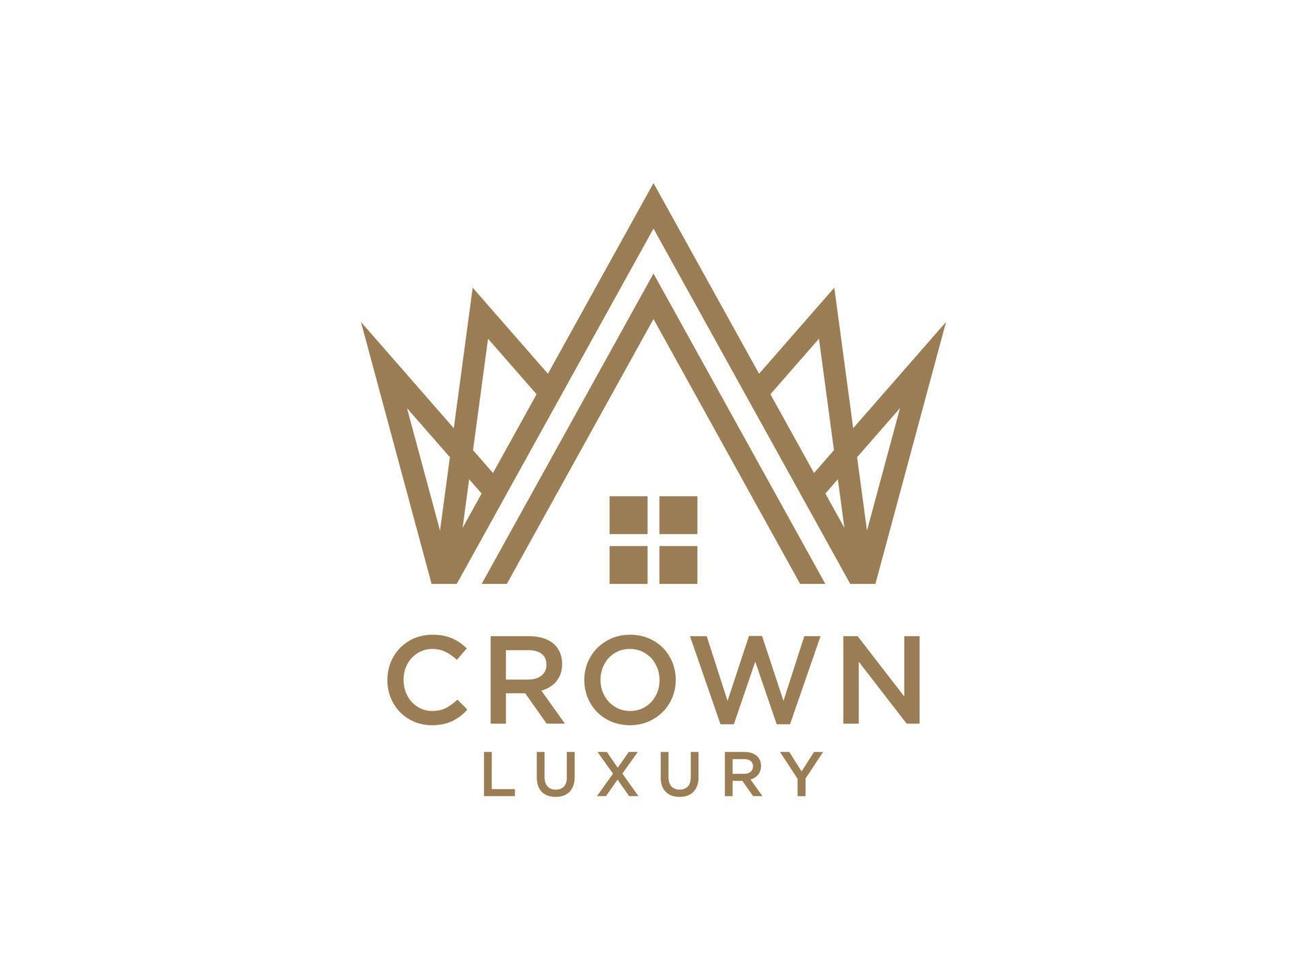 Abstract Geometric Crown and House Logo. Royal Home Symbol. Flat Vector Logo Design Template Element